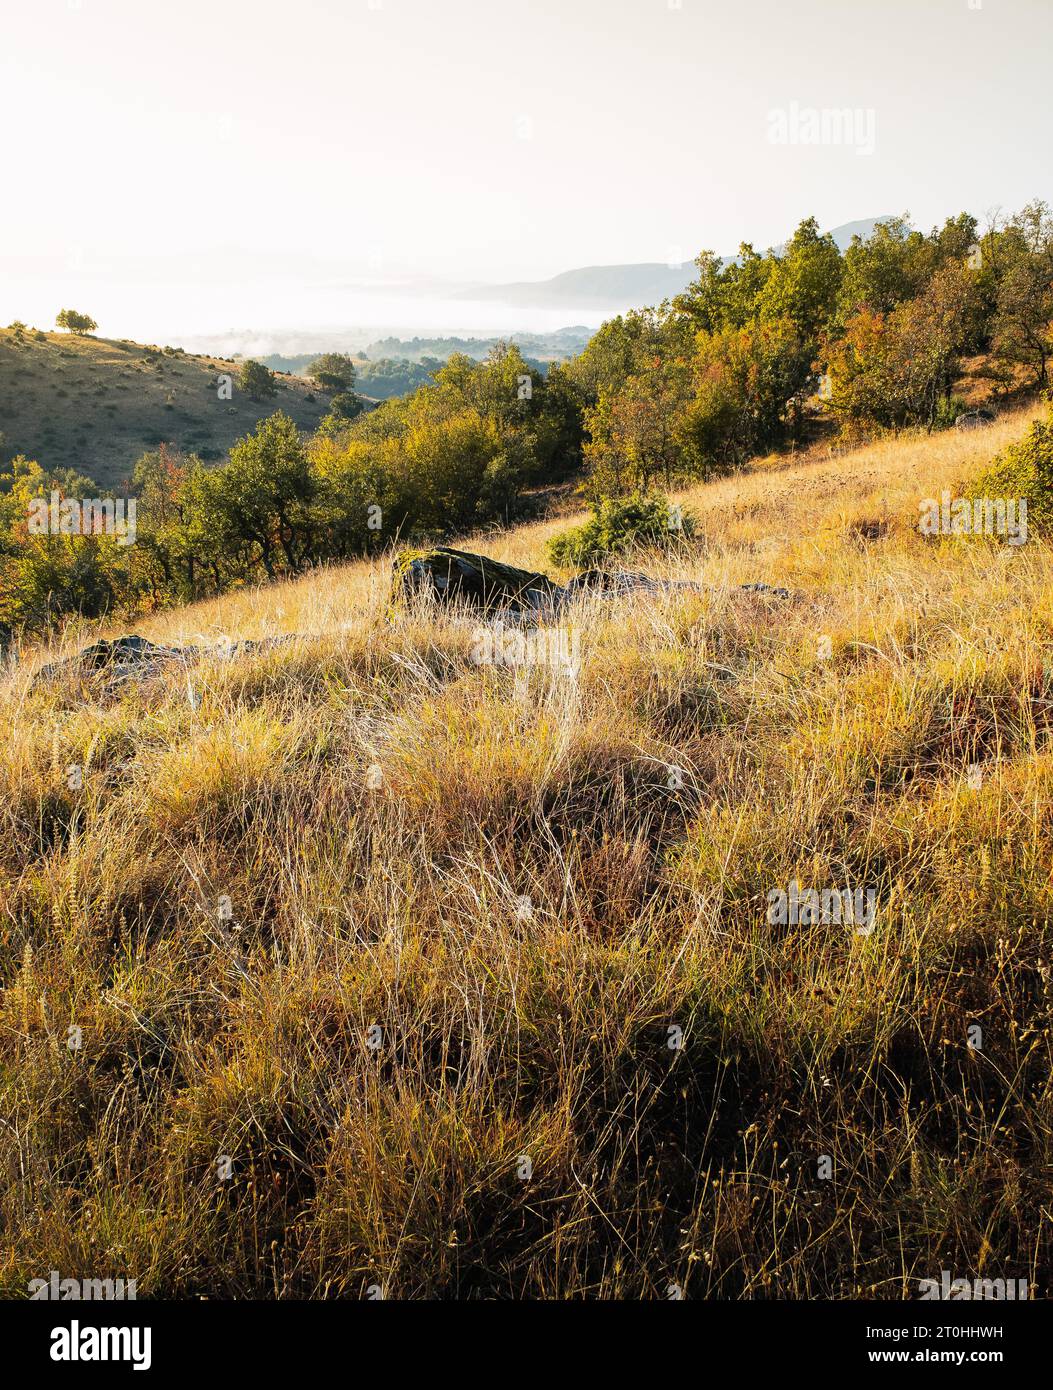 Beautiful morning view on top of a hill with golden grass and rocks in the foreground and beautiful background mountains and trees. Stock Photo